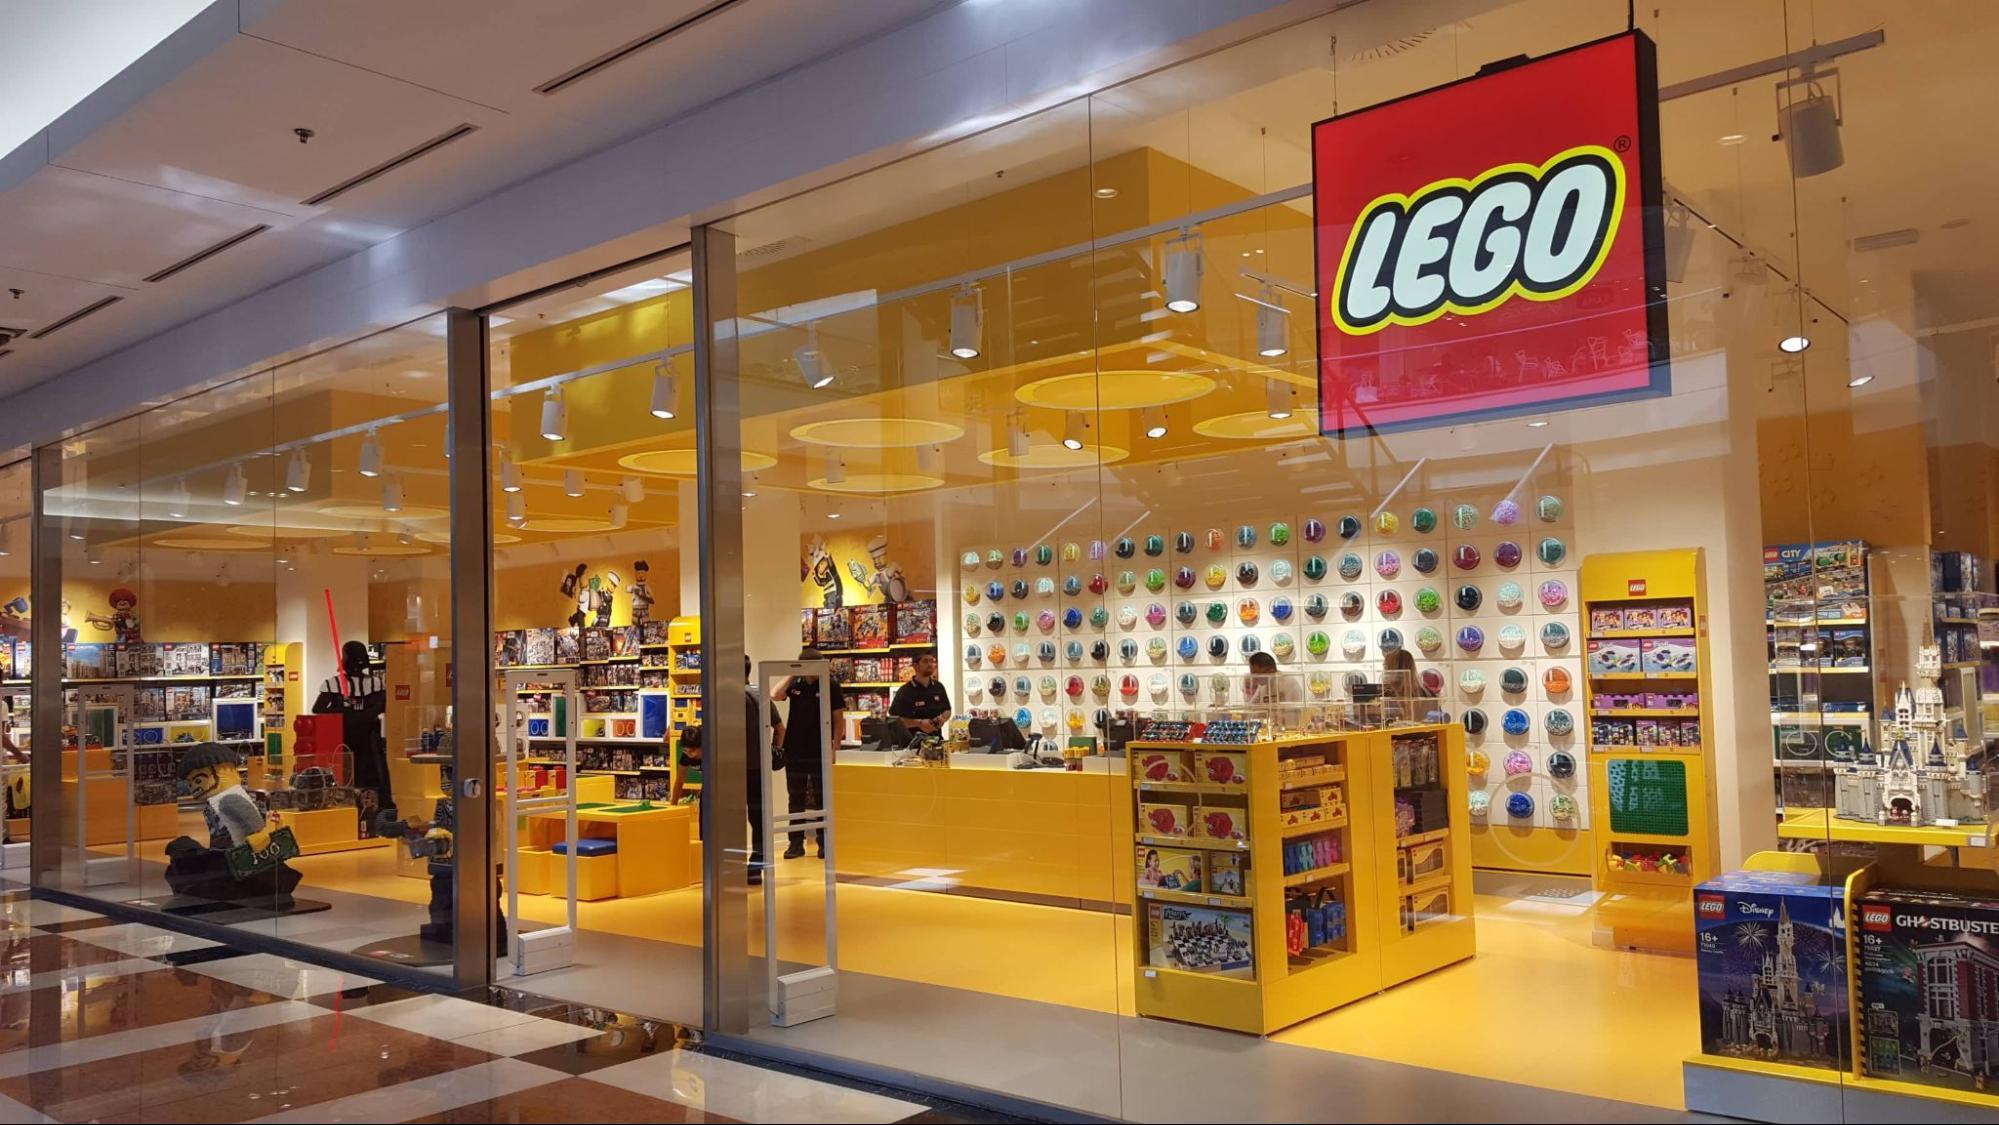 The Lego store with many different displays and lights